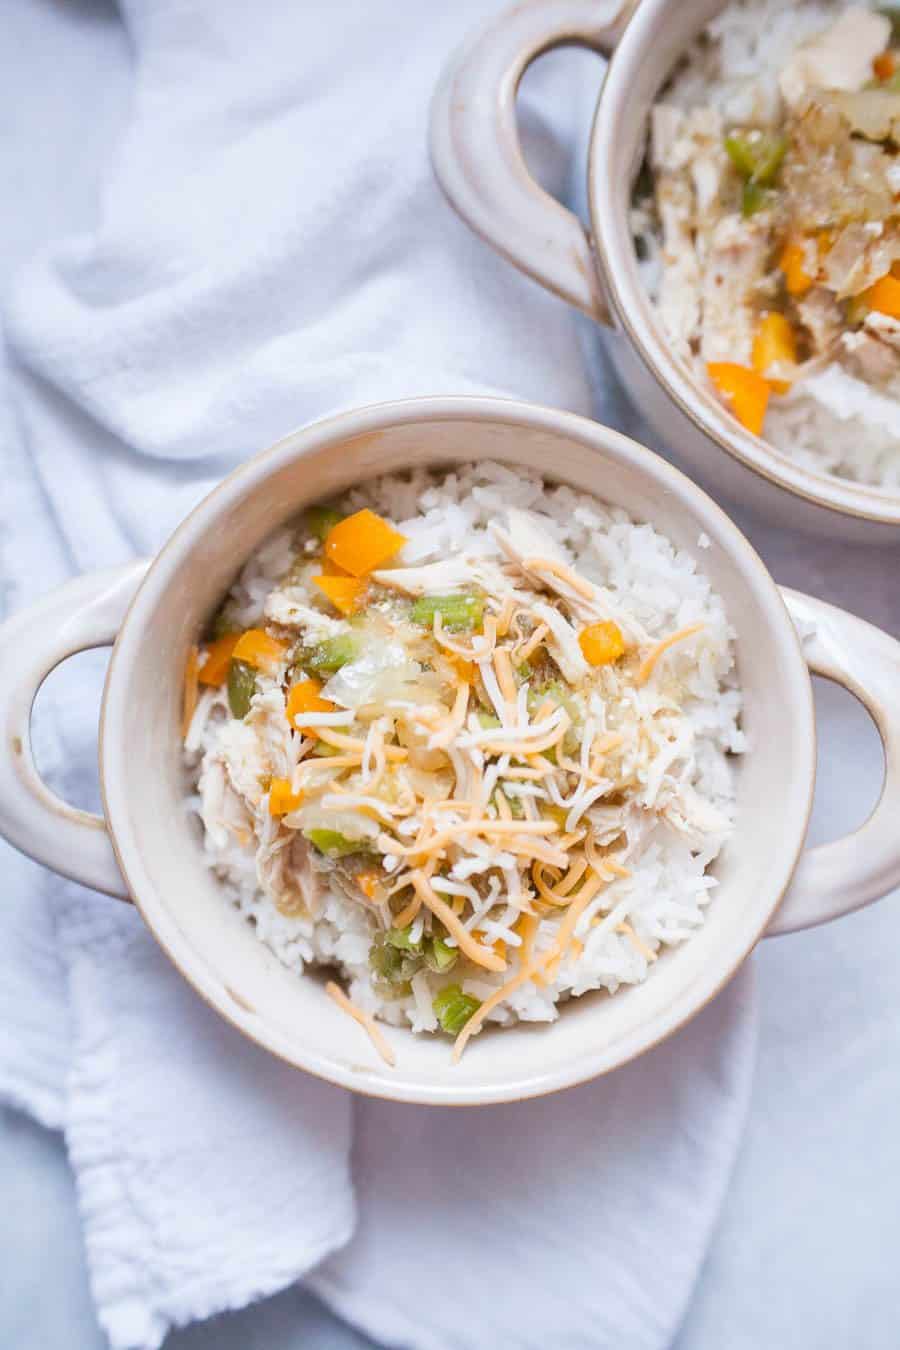 Slow Cooker Salsa Verde Chicken is an easy weeknight slow cooker meal the whole family will love! With just five simple ingredients of salsa verde, chicken, bell peppers, onions and rice, it's ready in a matter of hours and will take the stress out of dinnertime on a busy evening. 